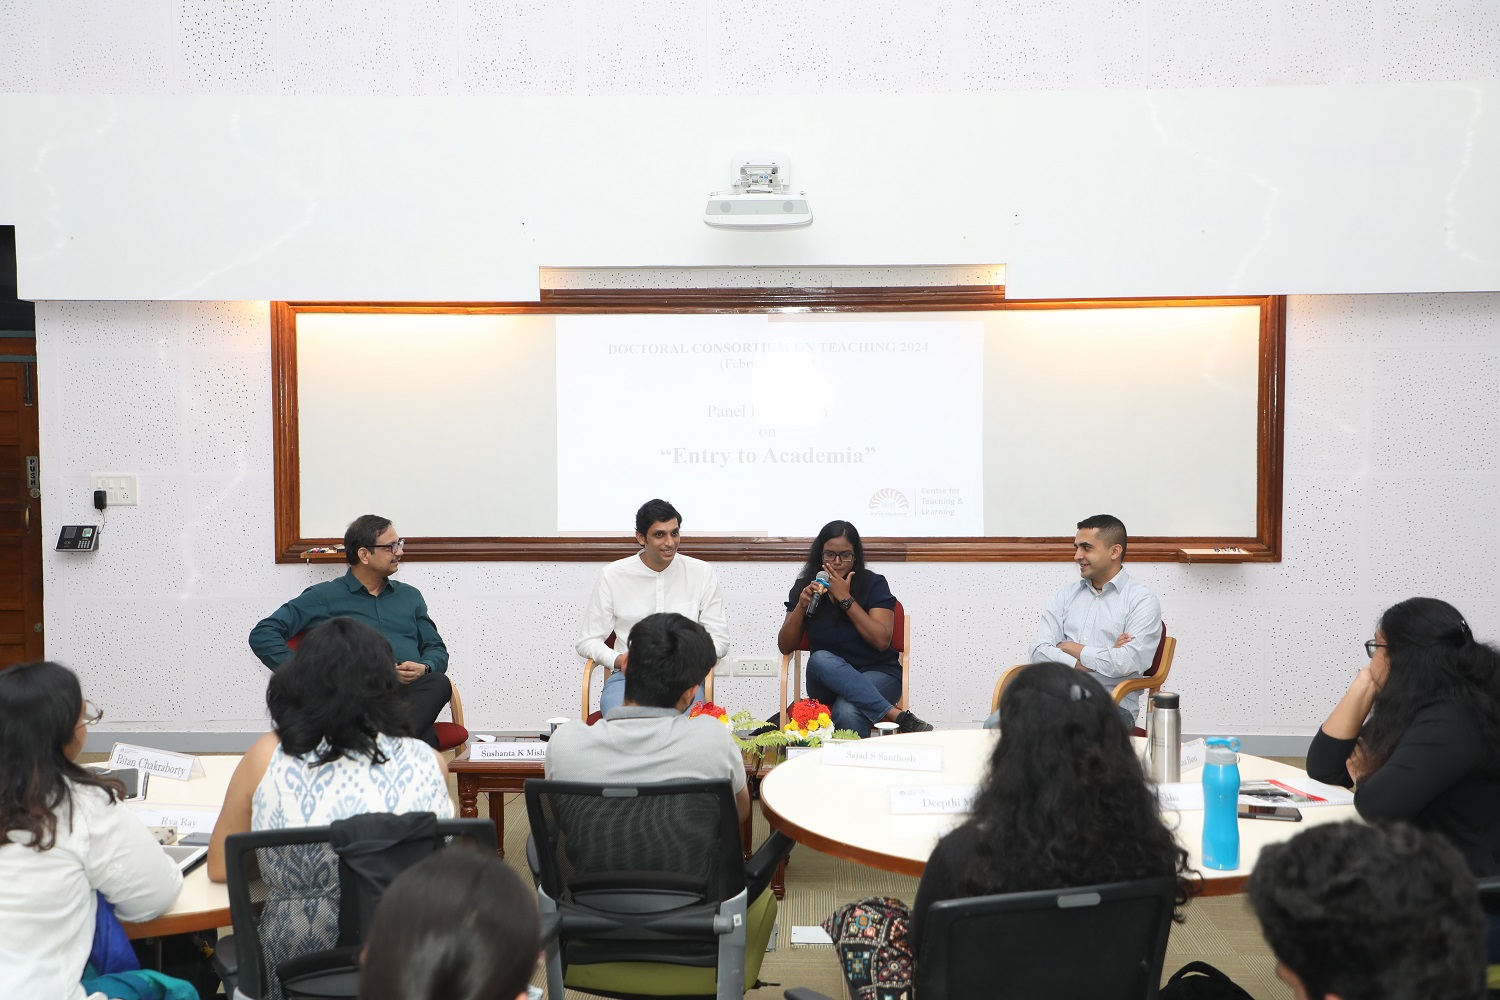 (From L to R): Prof. Sushanta K Mishra, Prof. Anand Deo, Prof. Reshma Chirayil, and Prof. Aditya Srinivas having a panel discussion on ‘Entry to Academia’. 